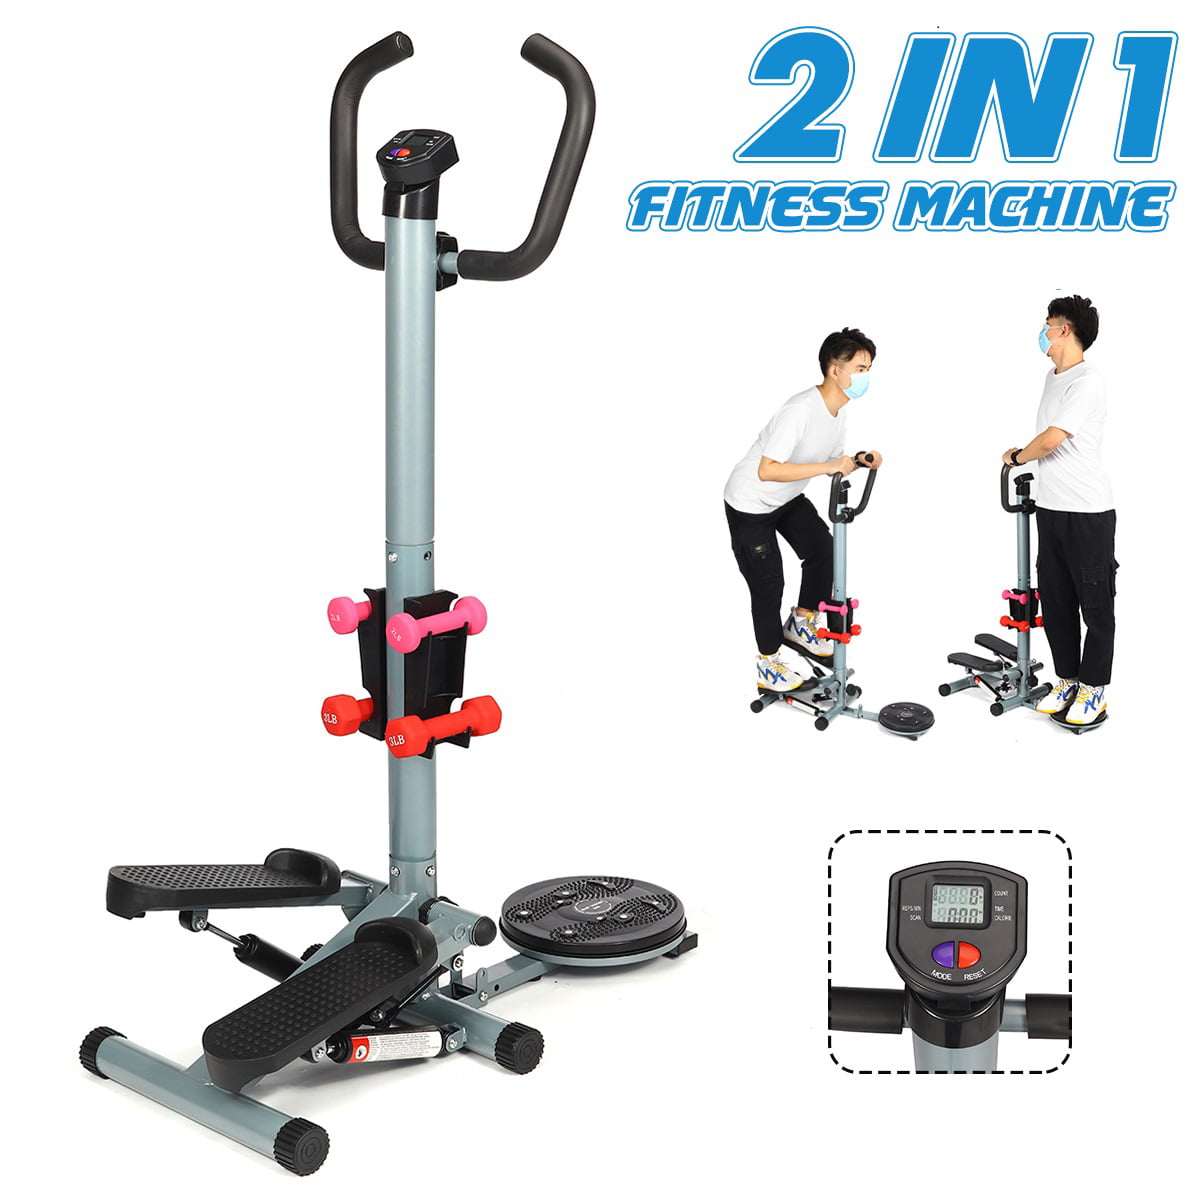 Akonza Stepper with Handle Bar Fitness Equipment GYM Training Body Workout Step LCD Display